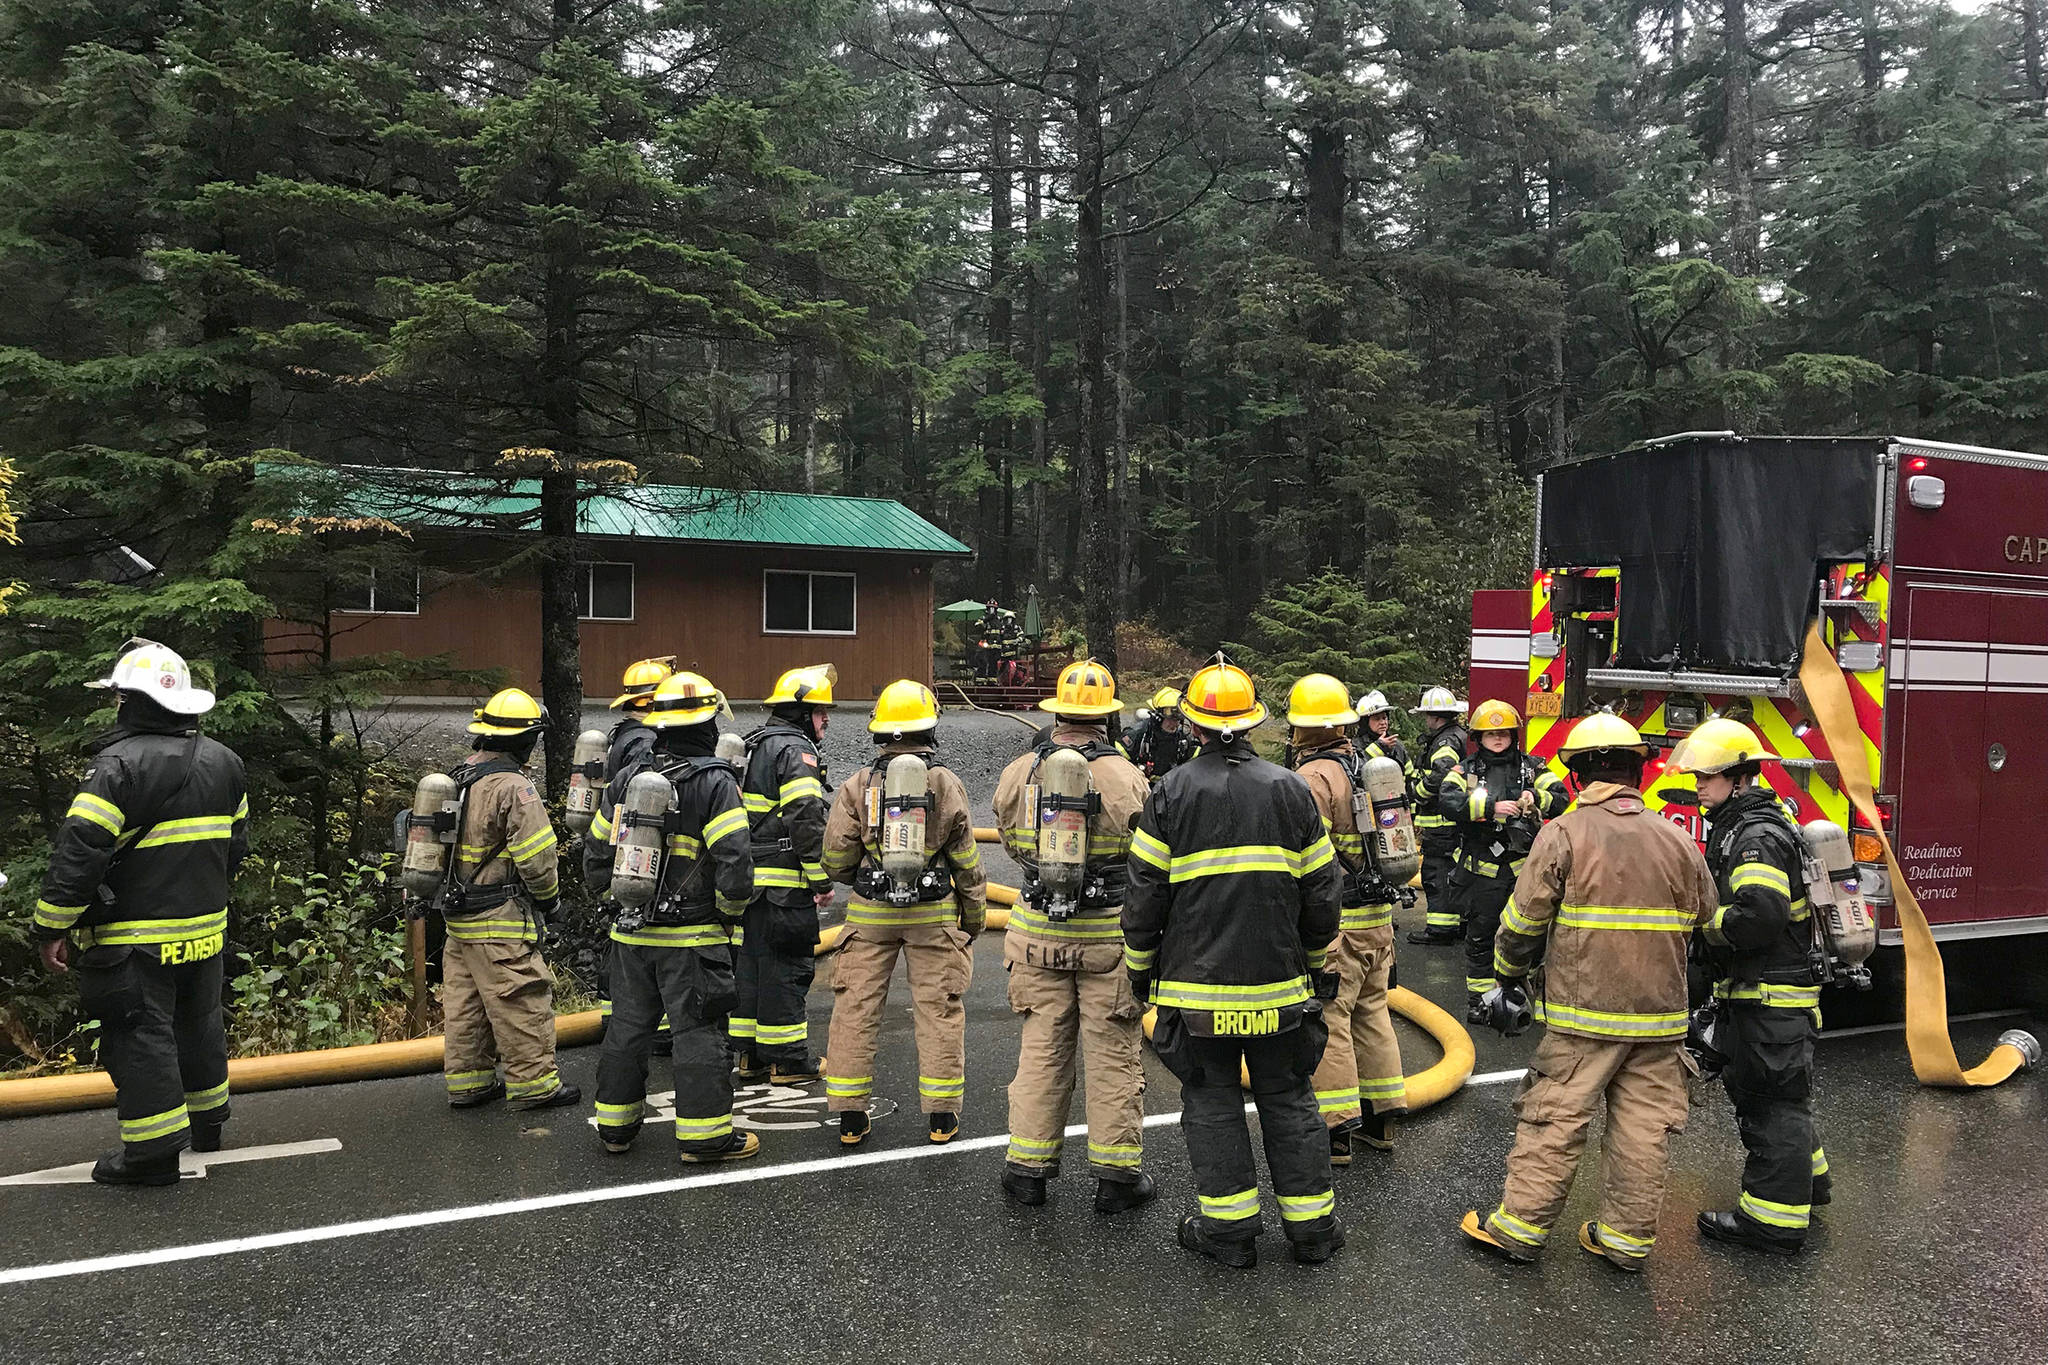 Capital City Fire/Rescue firefighters respond to a house fire on Douglas Highway on Tuesday, Oct. 16, 2018. The owners were not home at the time, and were unharmed, but two dogs died in the blaze. (Alex McCarthy | Juneau Empire)